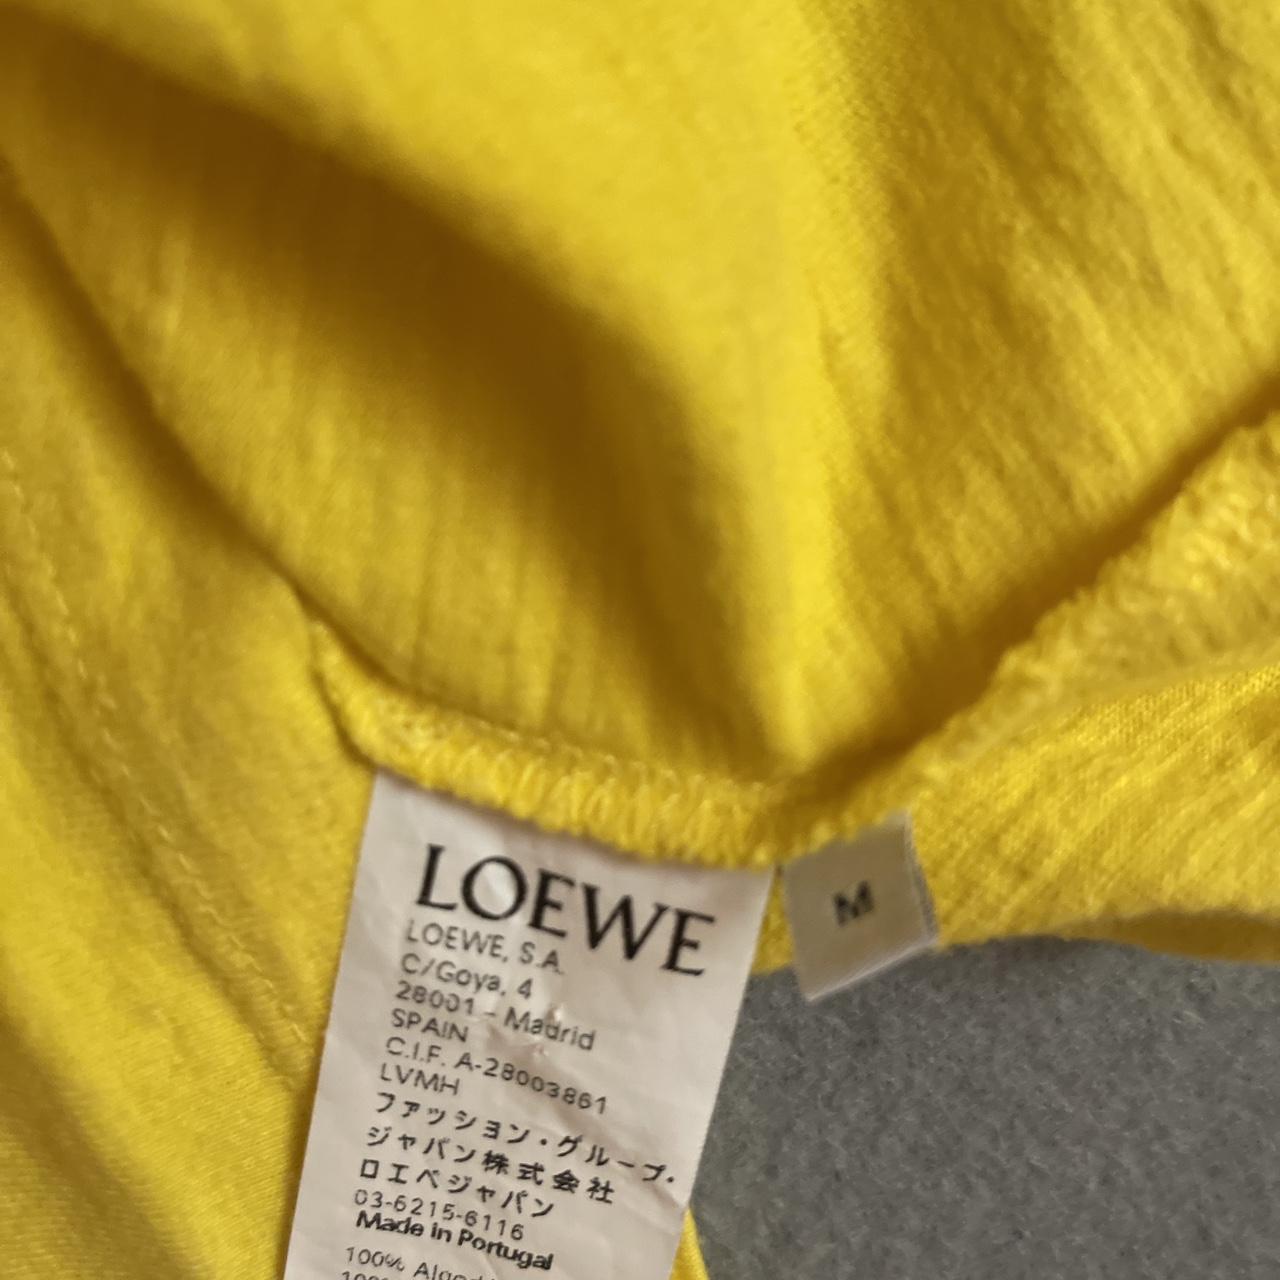 Product Image 4 - Loewe t shirt only worn